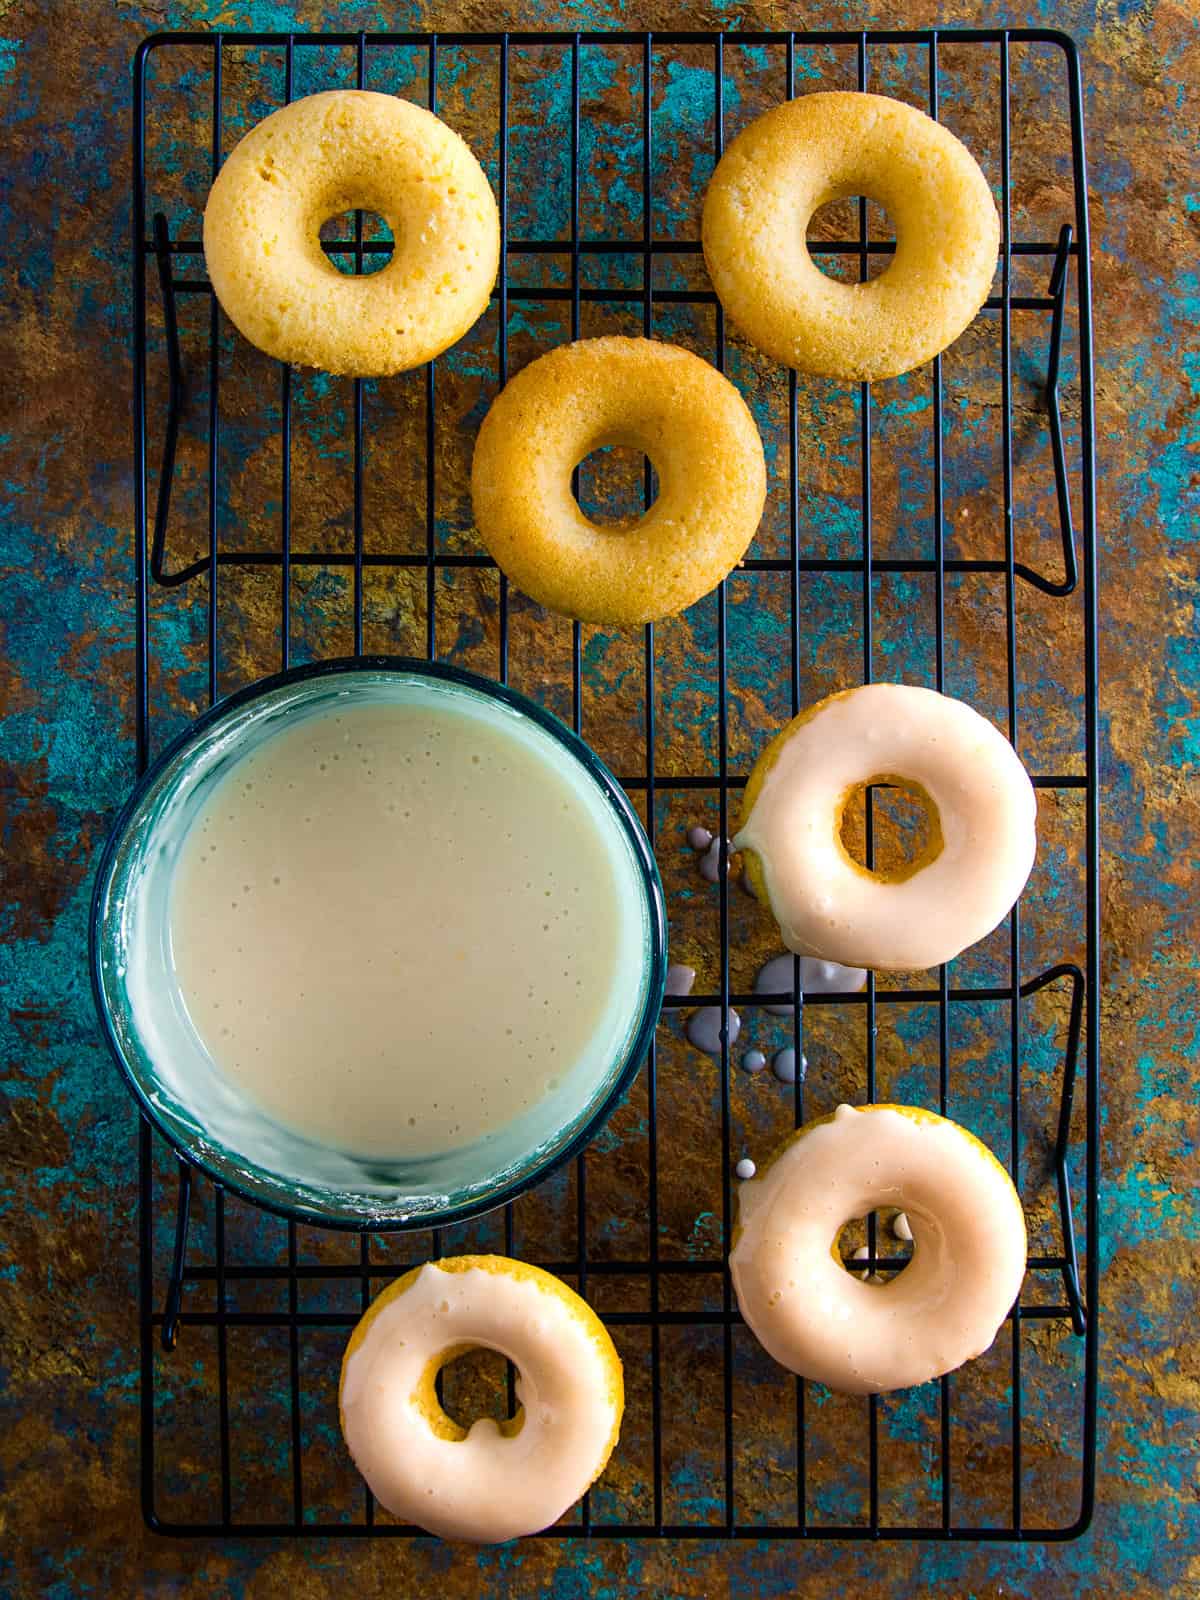 Lemon donuts being dipped into the lemon glaze.